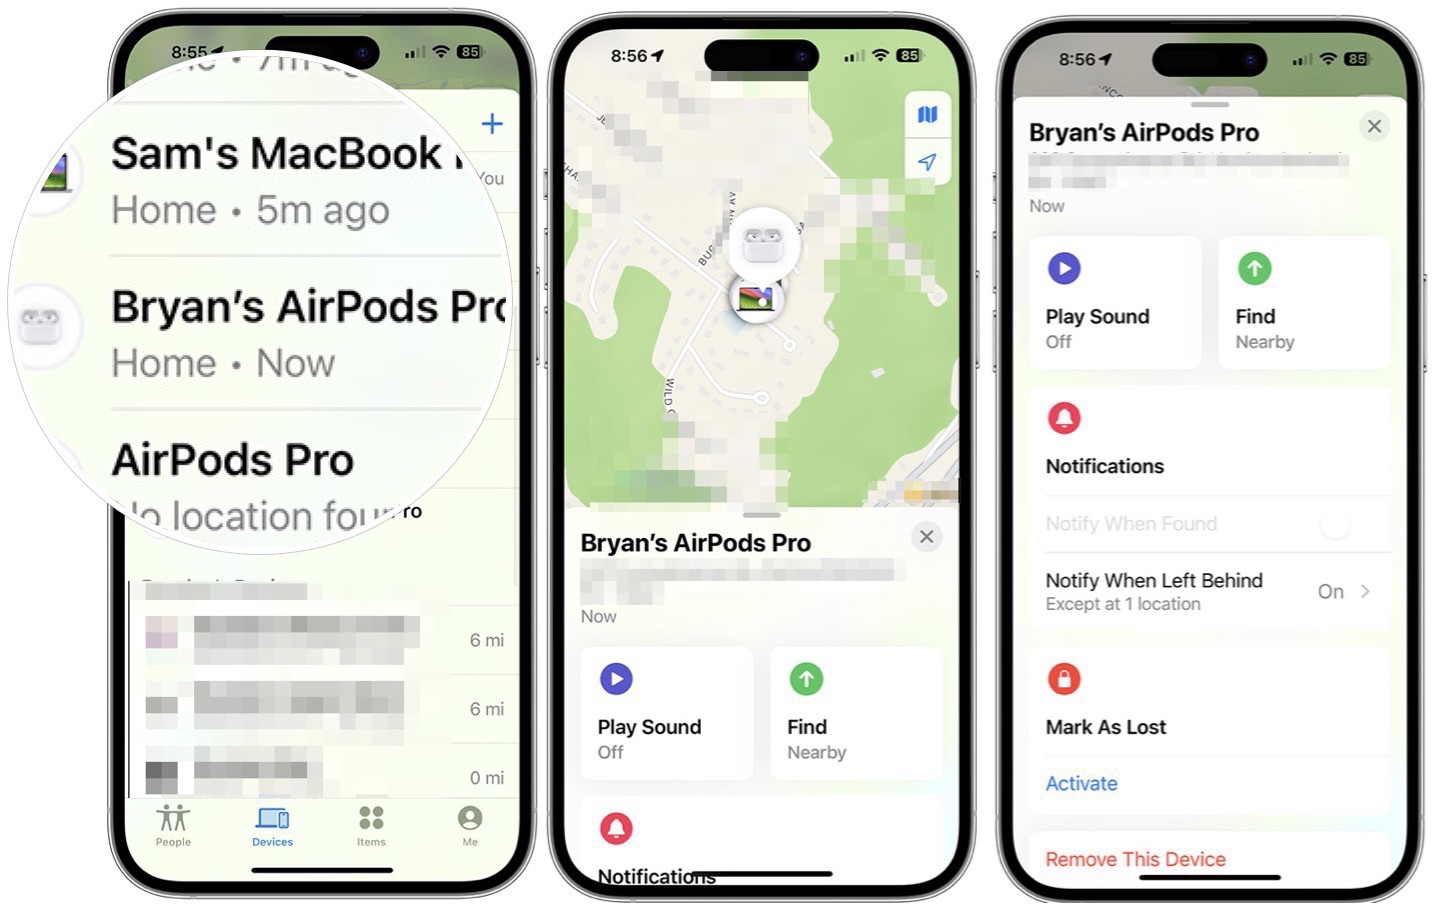 Screenshots showing steps to find lost AirPods in the Find My app on iPhone.